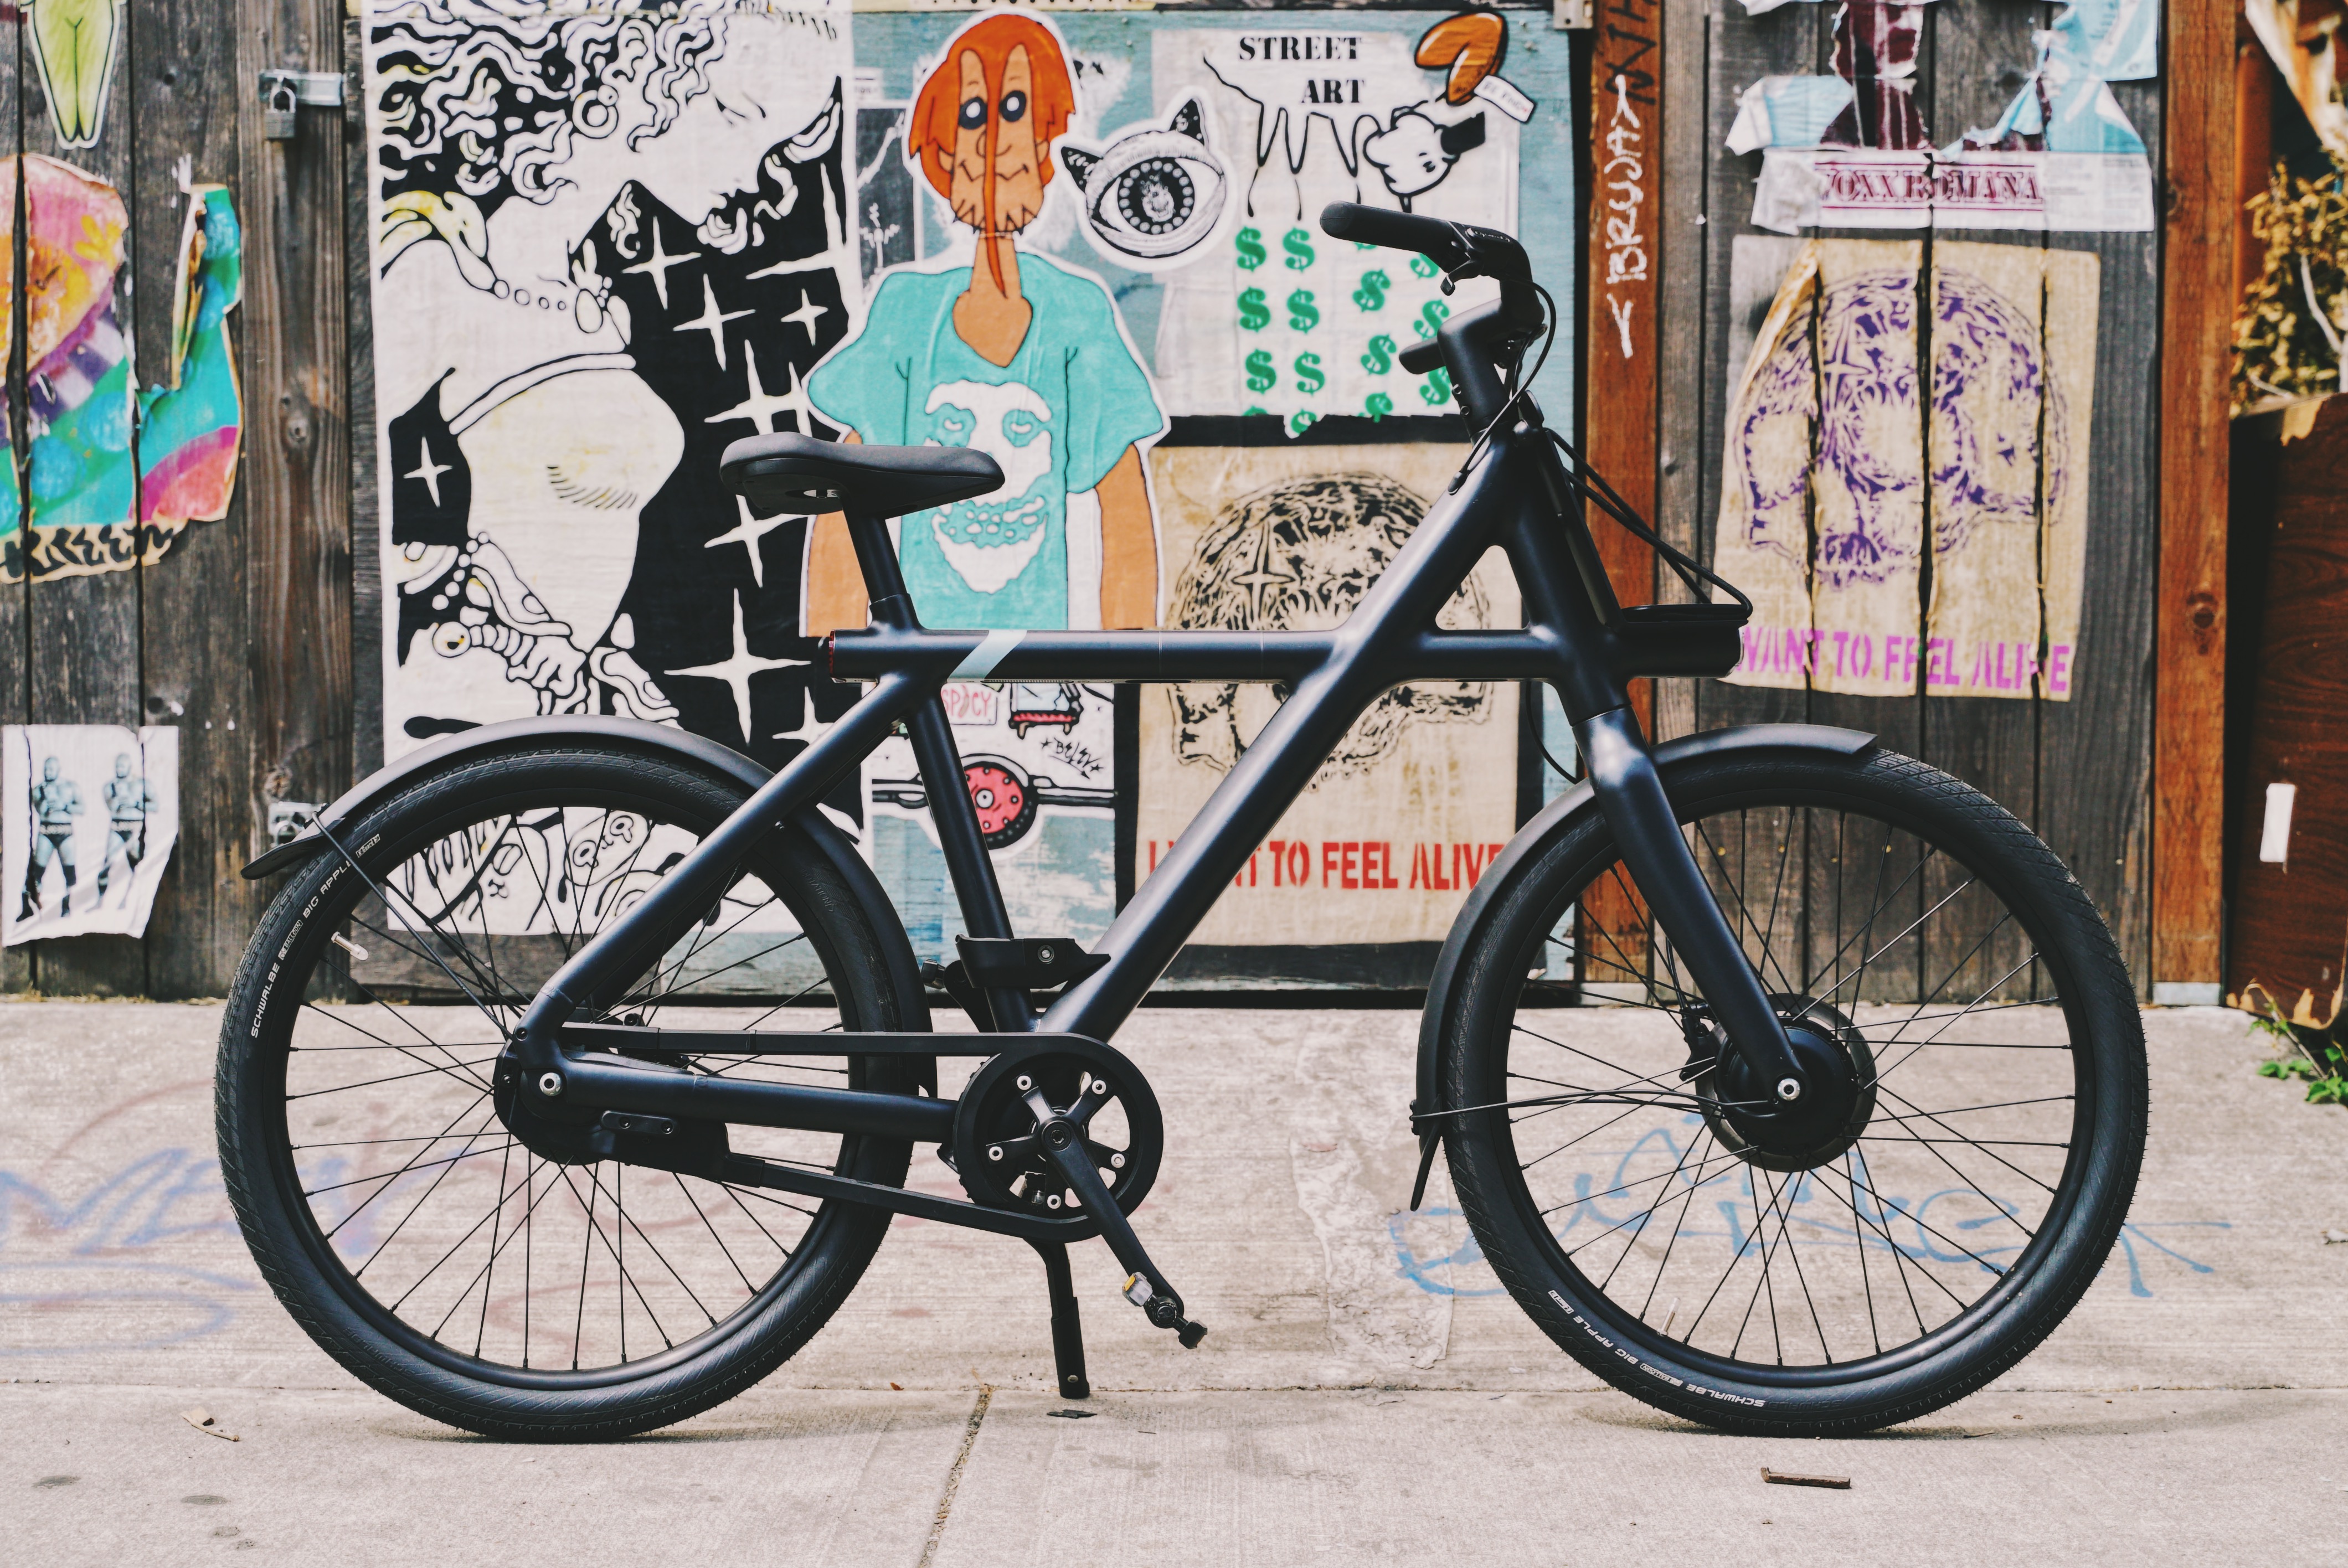 Cowboy 4 ST electric bike review: The best e-bike for city